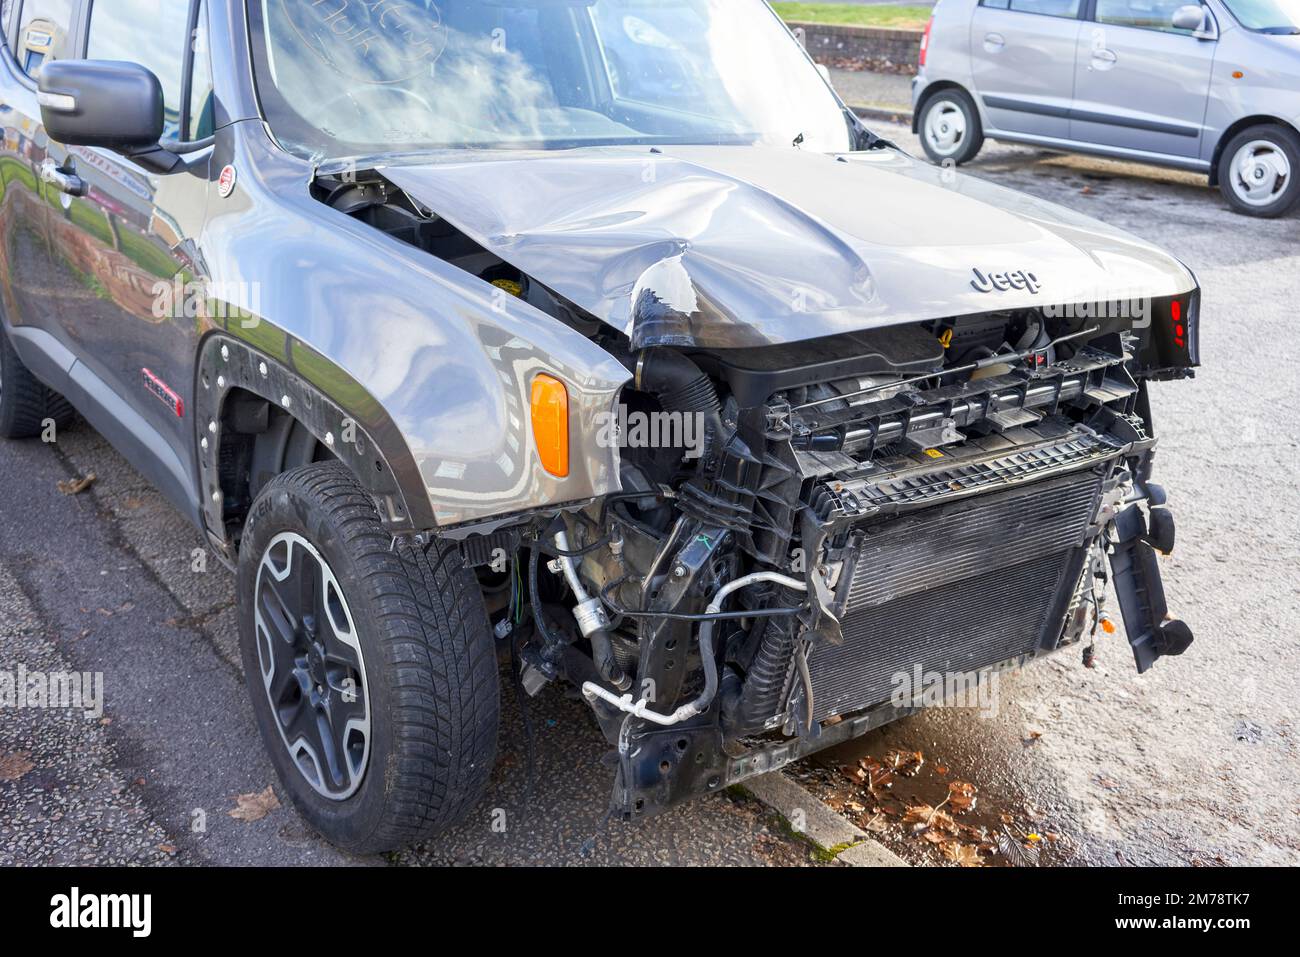 Crash damage to the front of a Jeep vehicle parked at the side of the road Stock Photo